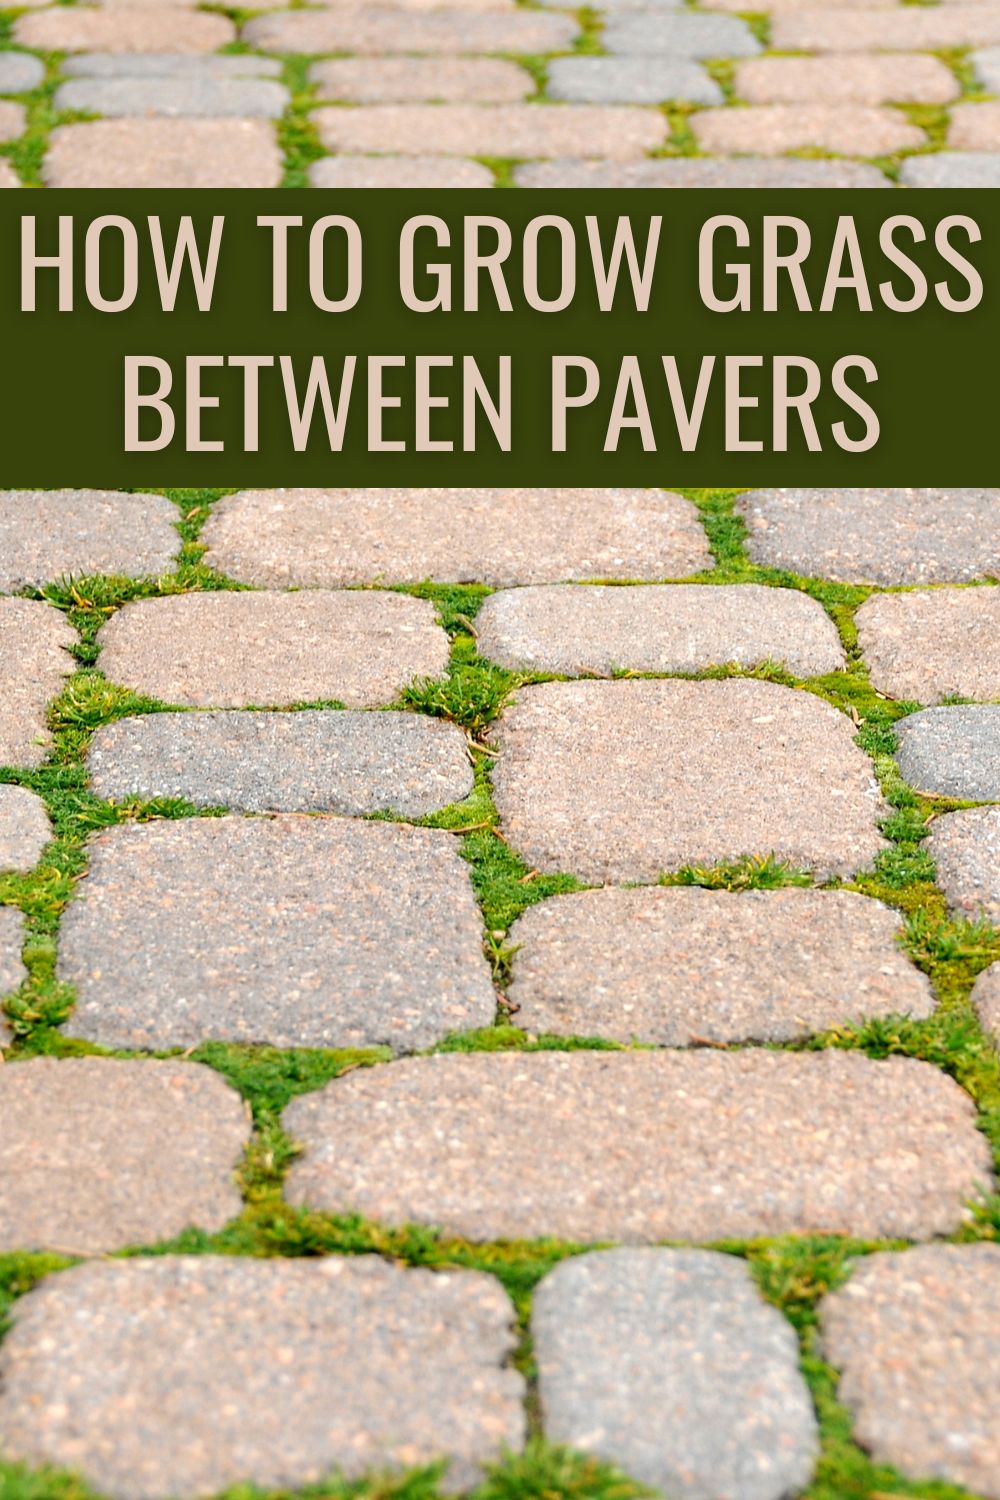 How to grow grass between pavers.